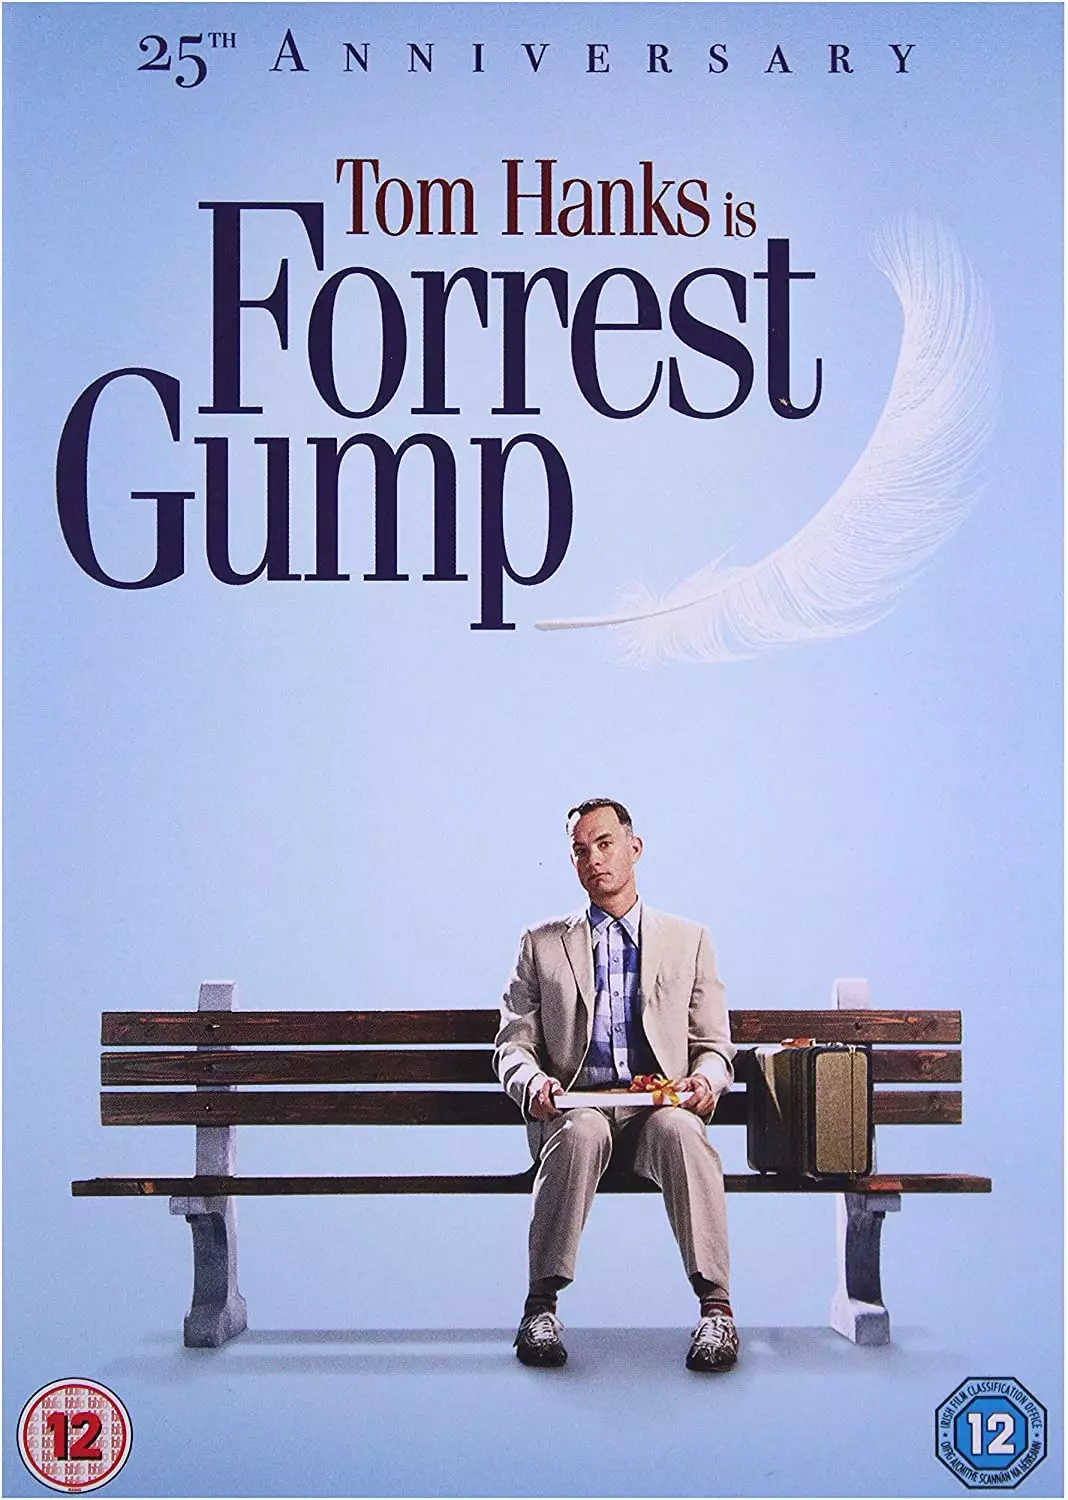 Babe are you okay? You've barely touched your used Forrest Gump DVD.